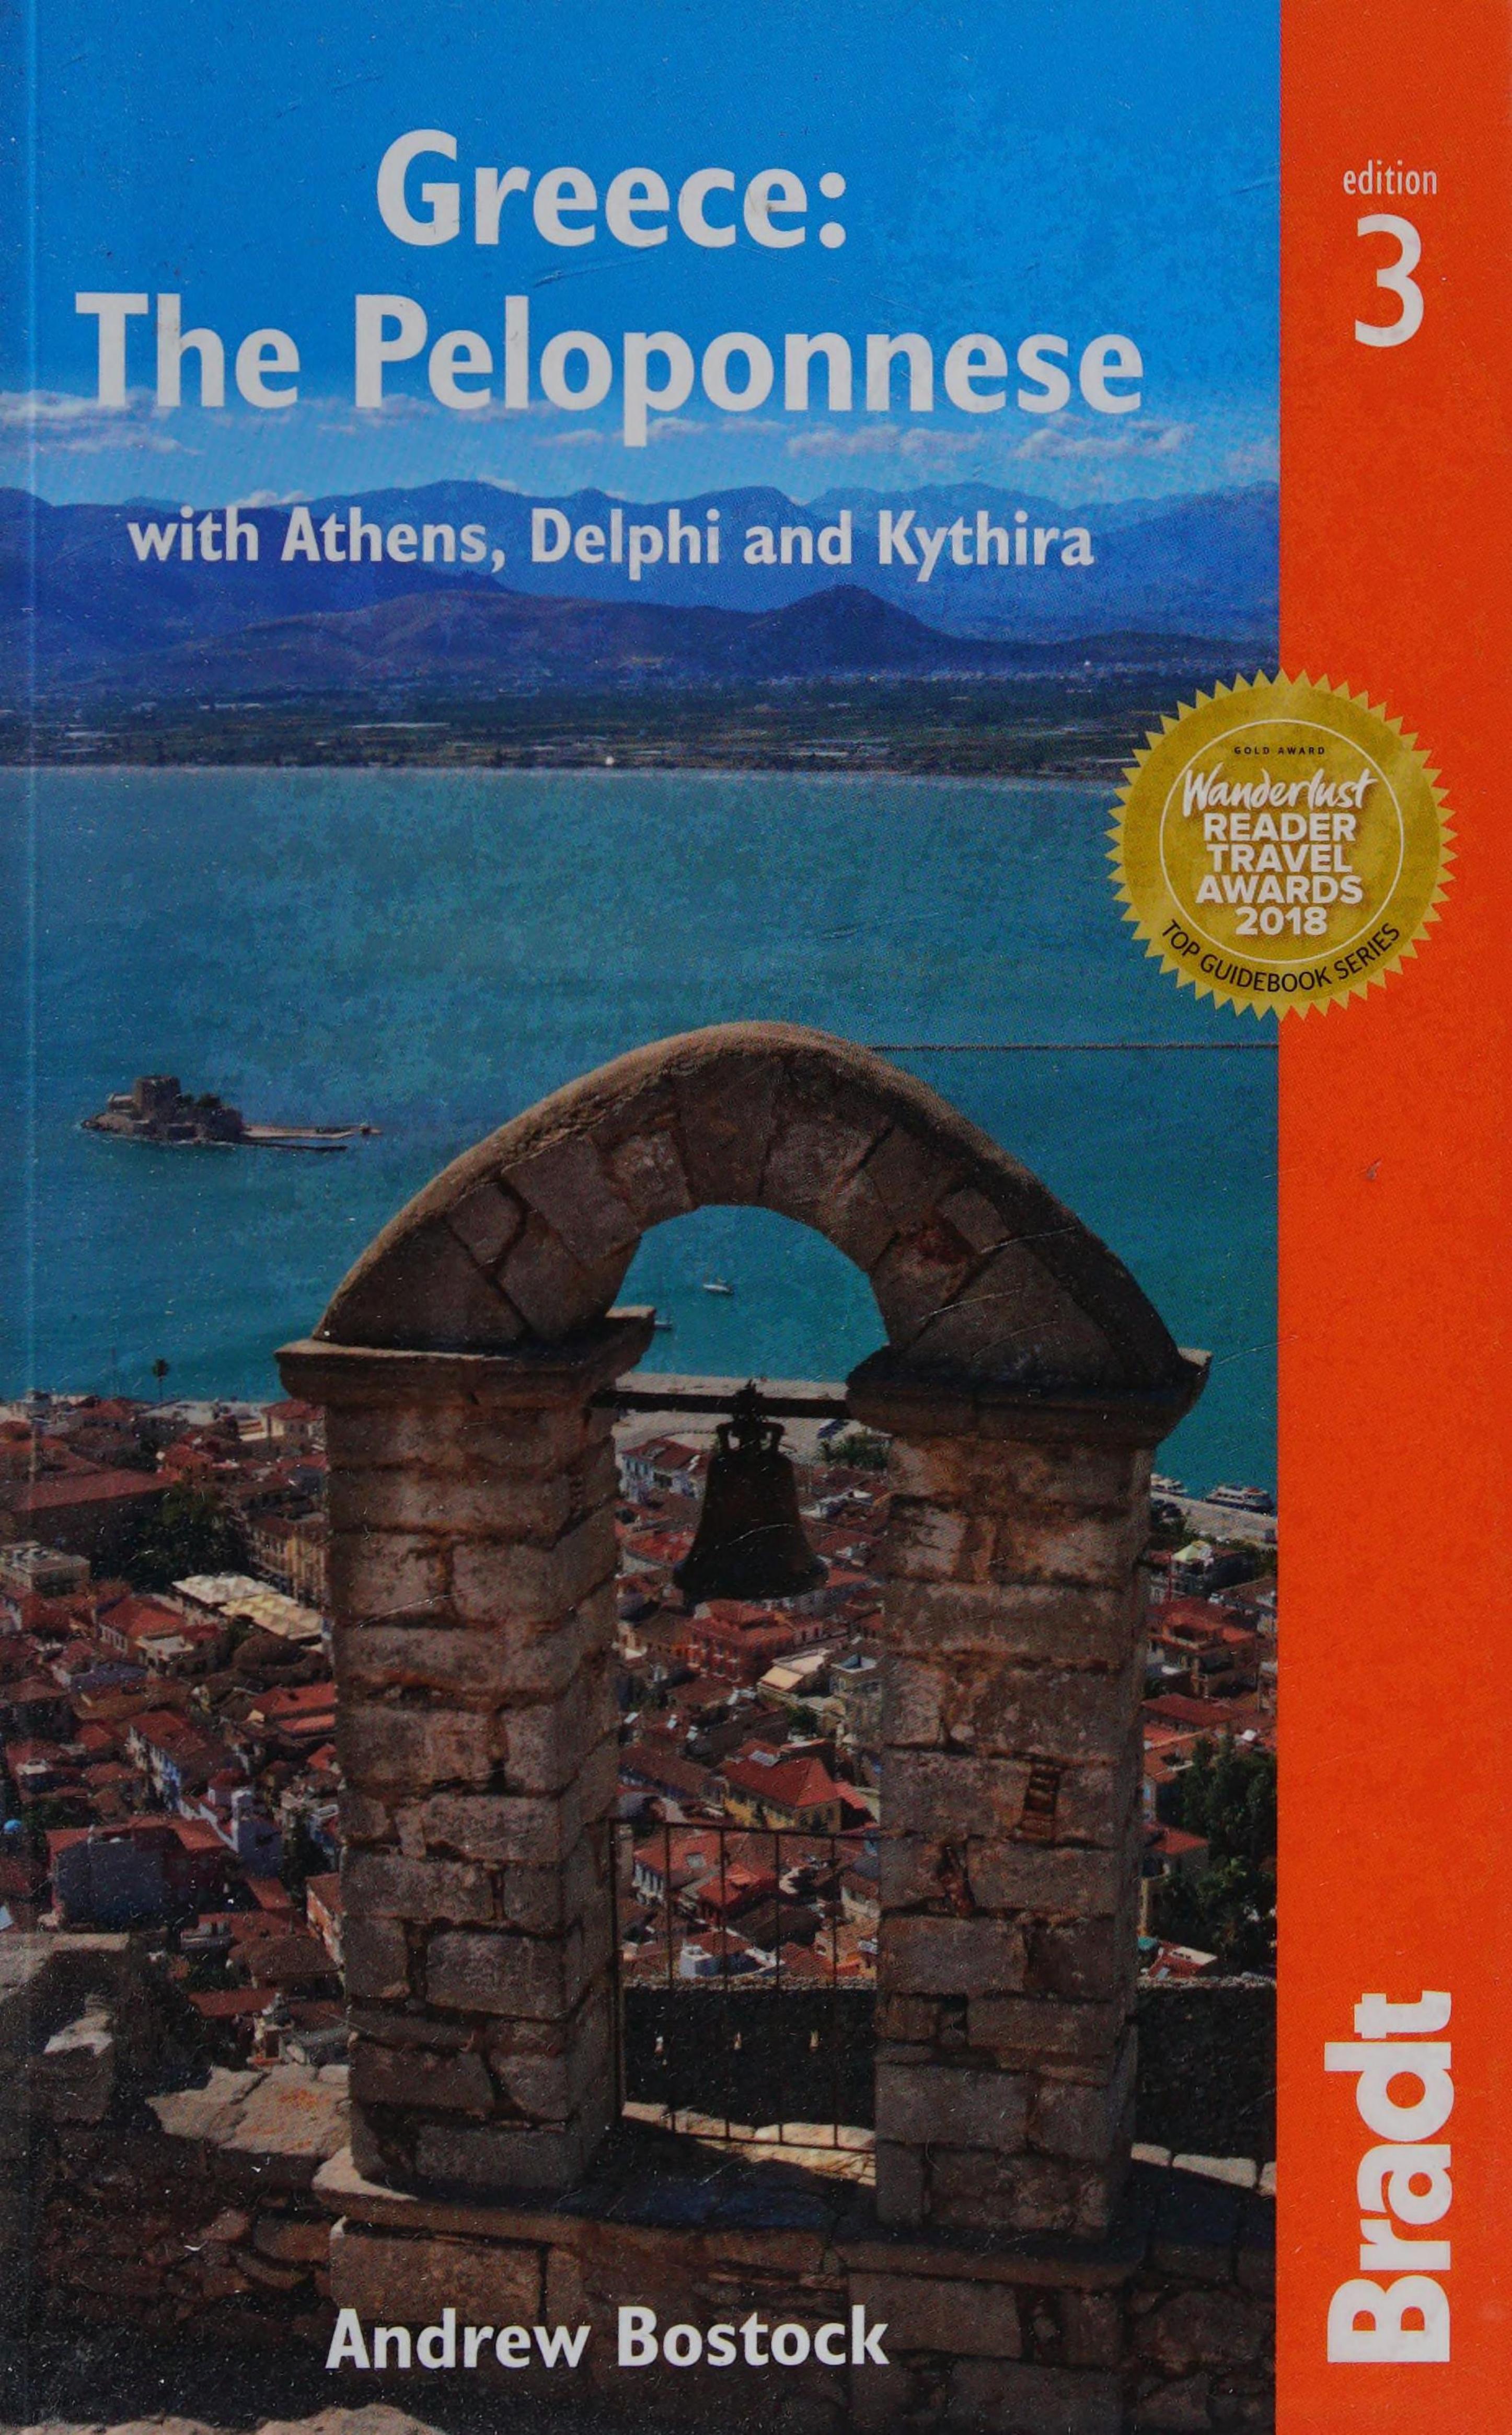 Greece: The Peloponnese: with Athens, Delphi and Kythira (Bradt Travel Guides) by Andrew Bostock